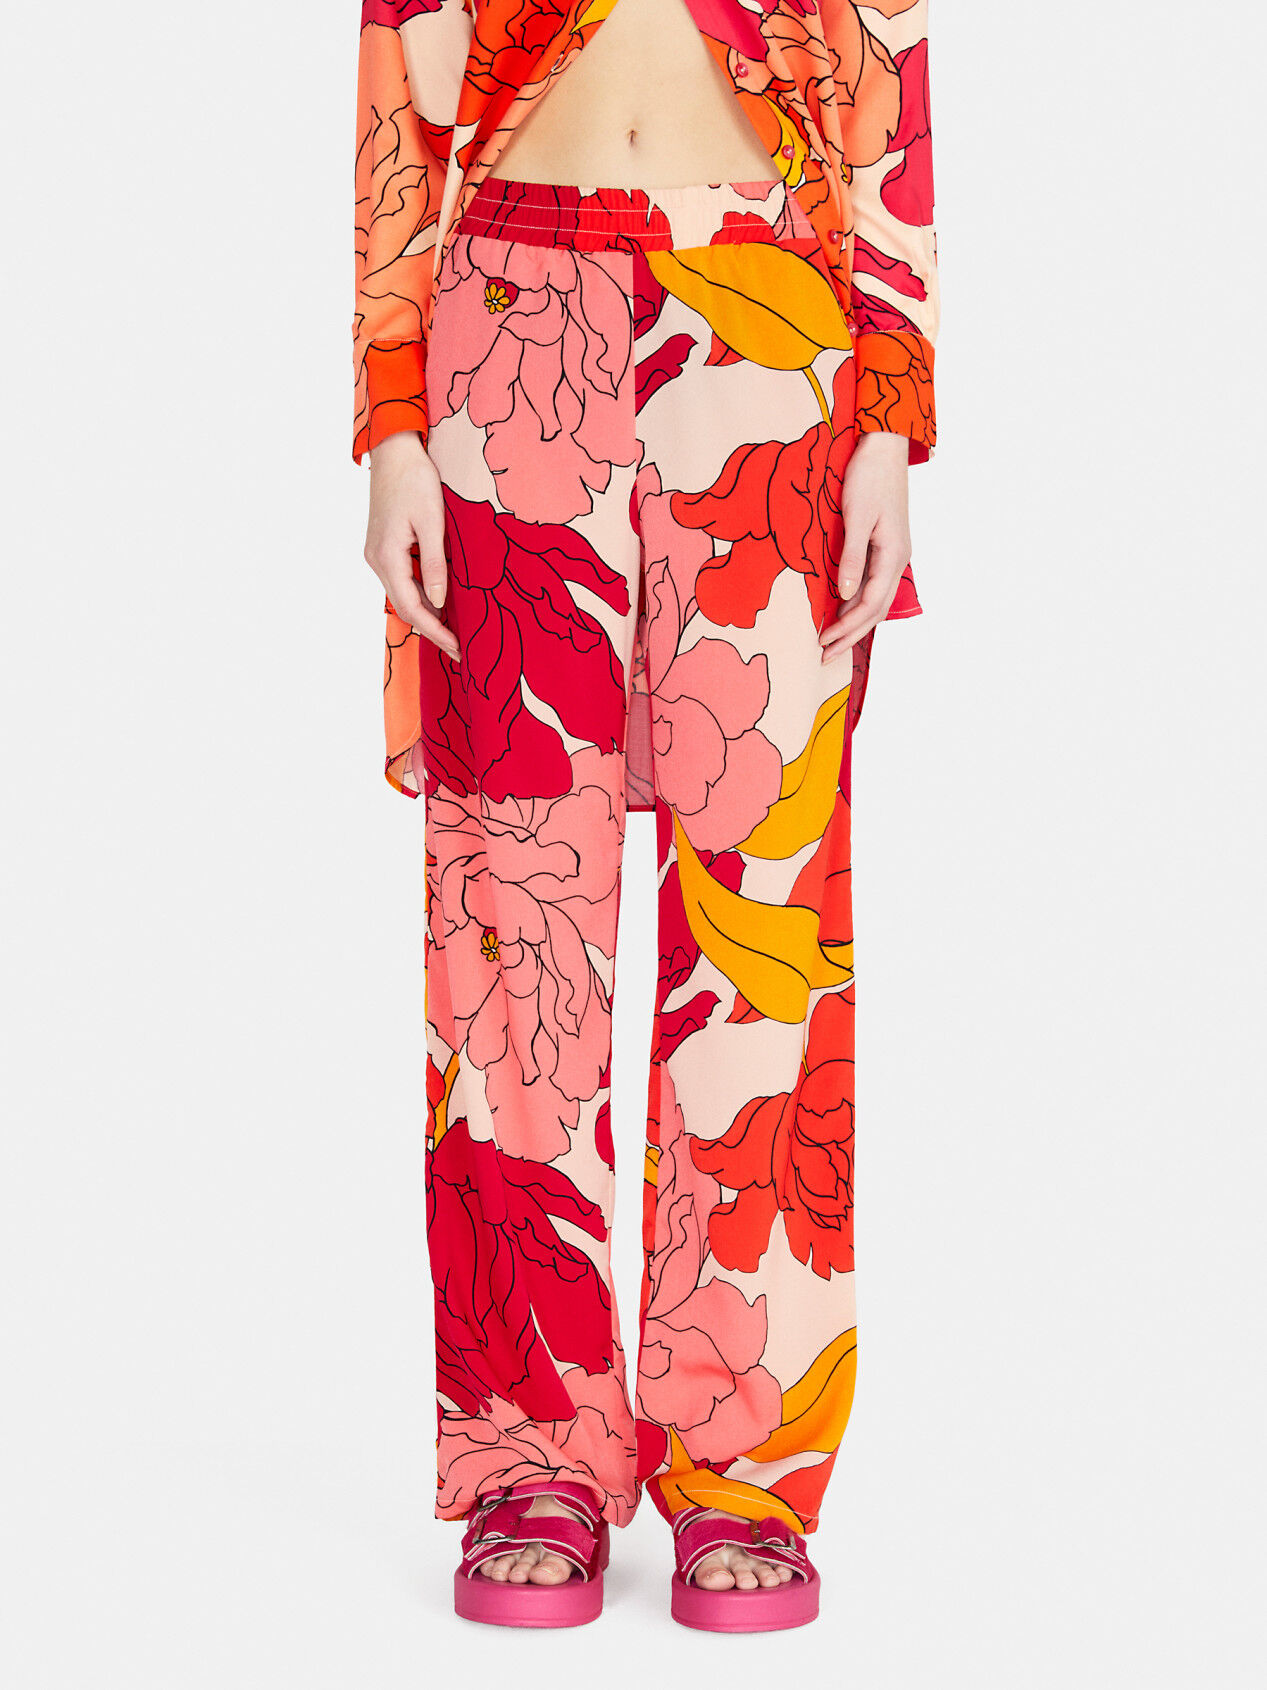 Floral printed trousers in Multicolor | GERRY WEBER